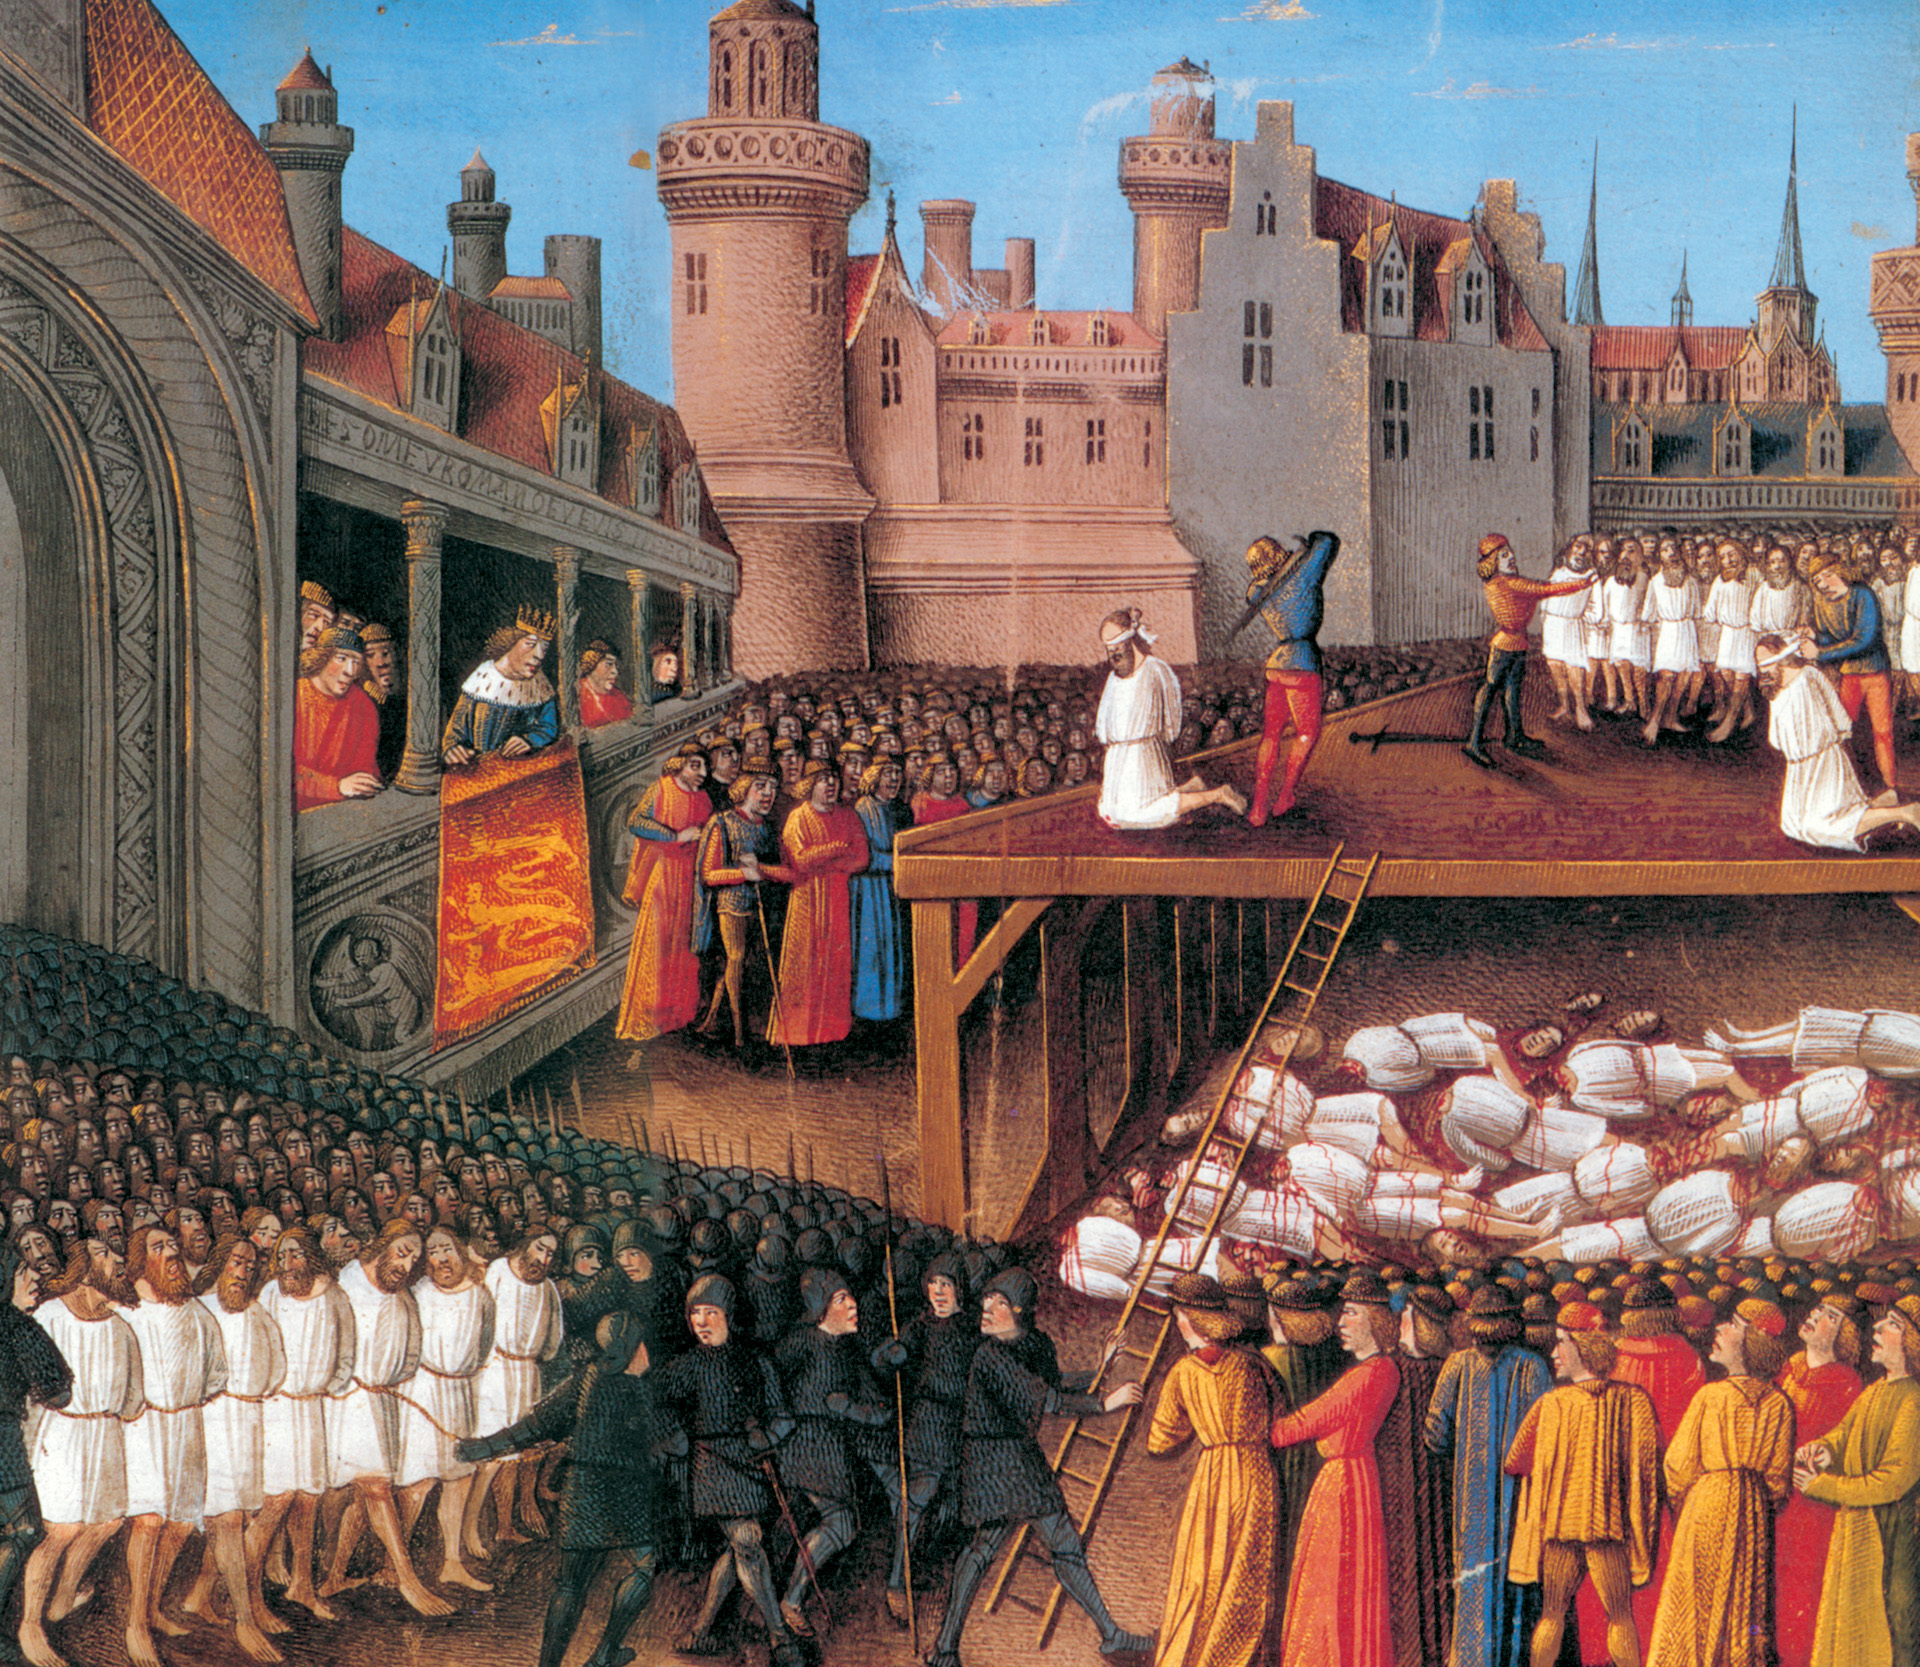 While Richard’s mass execution of upwards of 2,000 Muslim prisoners at Acre shocks modern sensitivities, it was an atrocity that was common in medieval times.